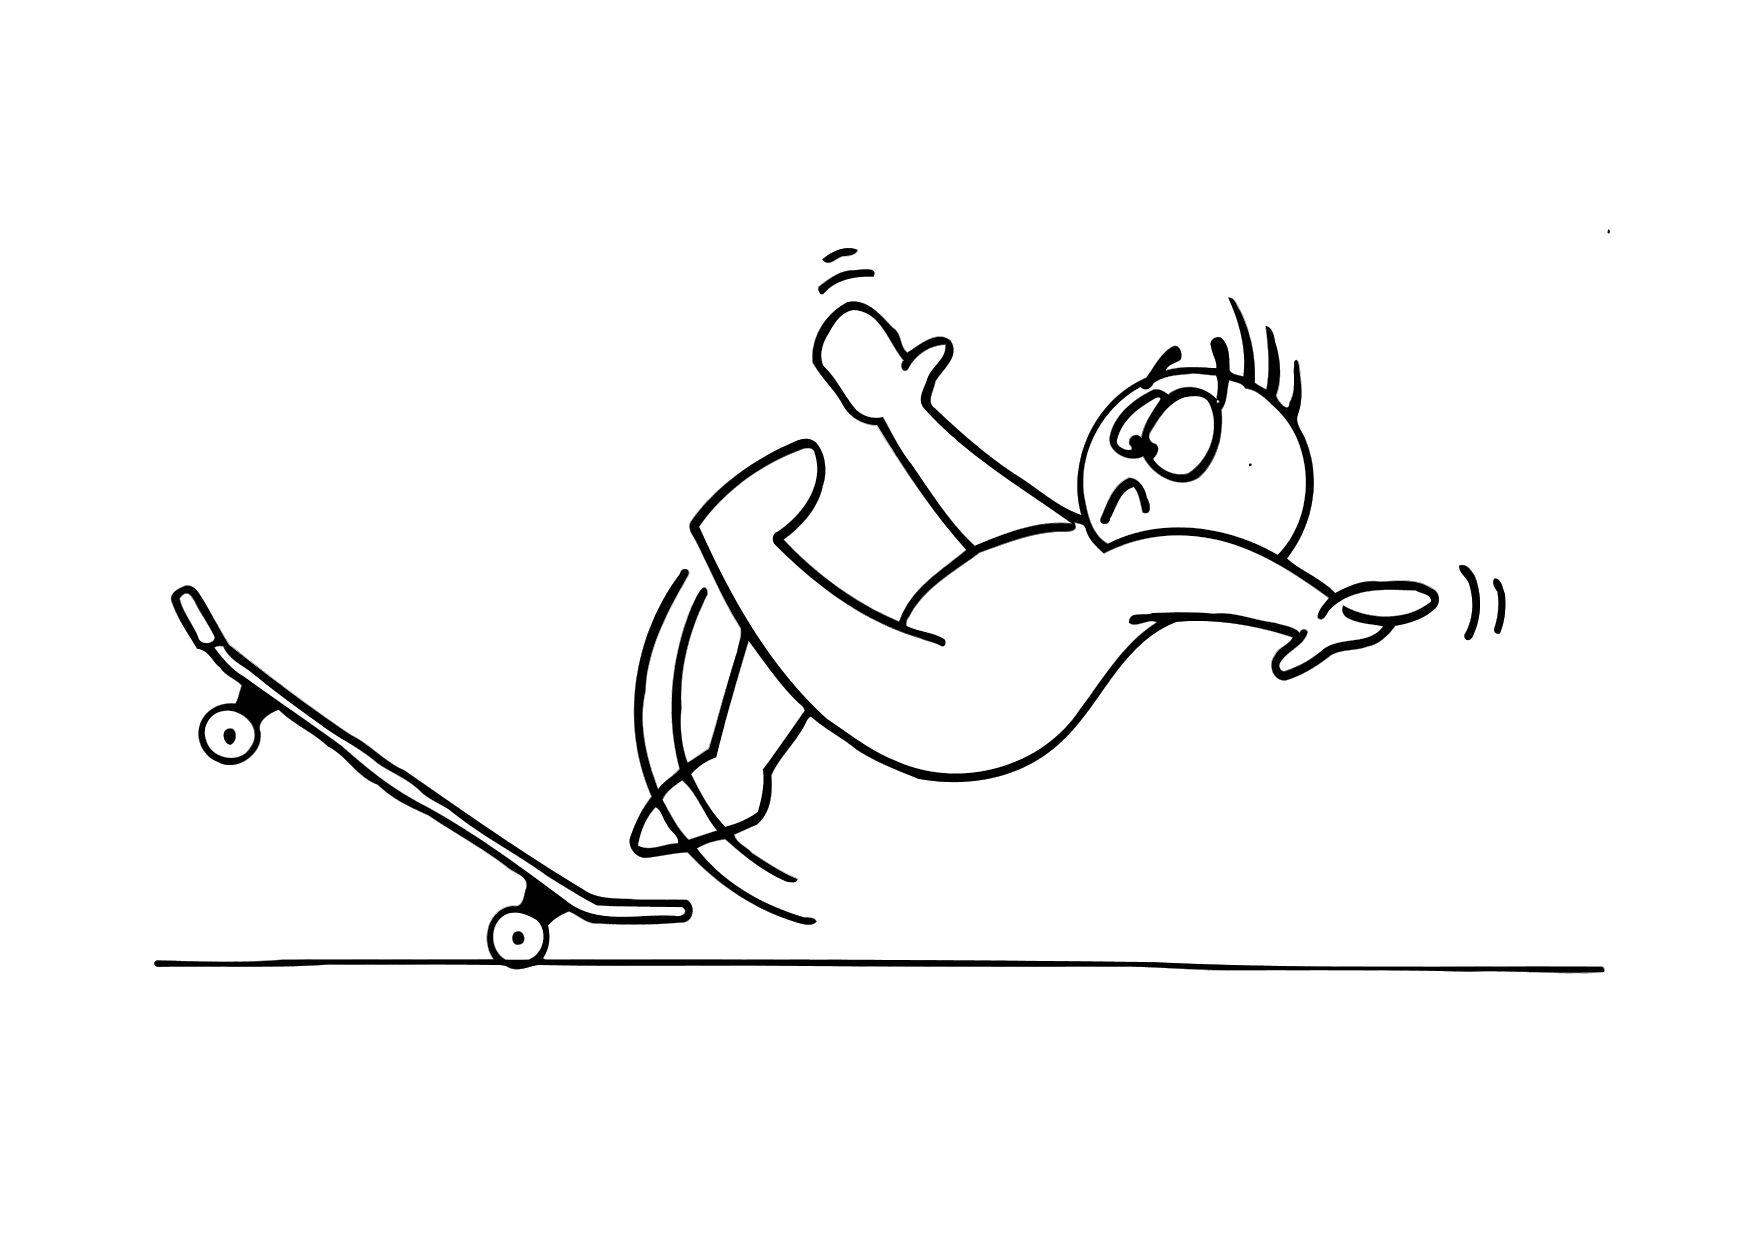 Coloring page falling